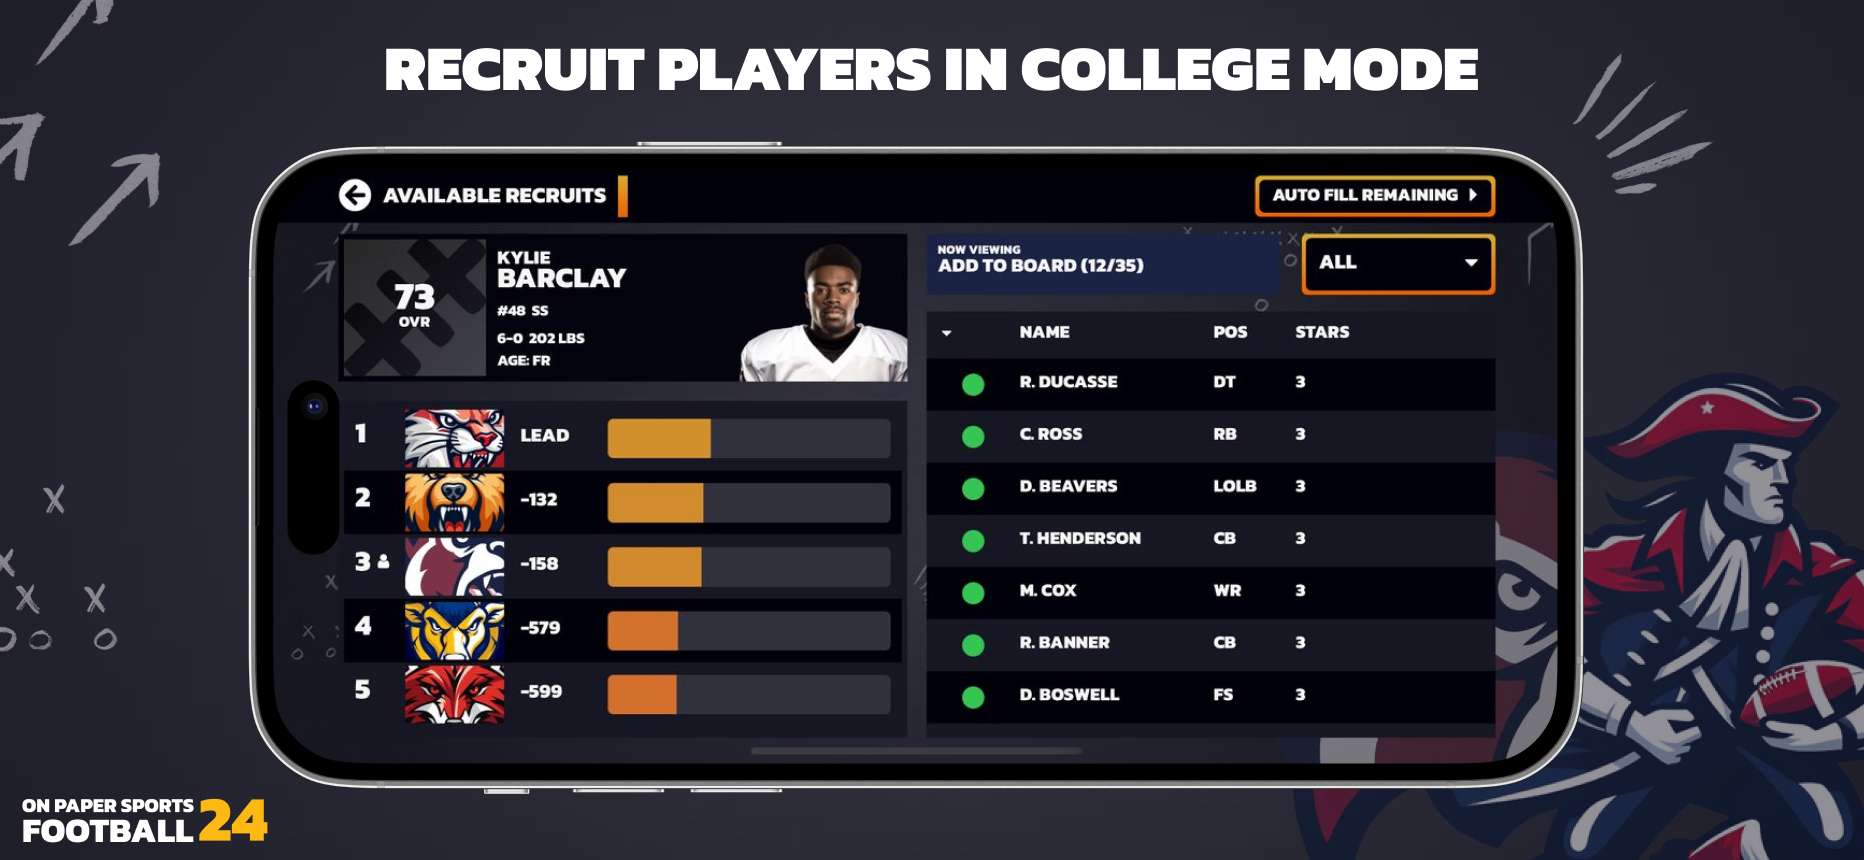 Recruit players in college mode